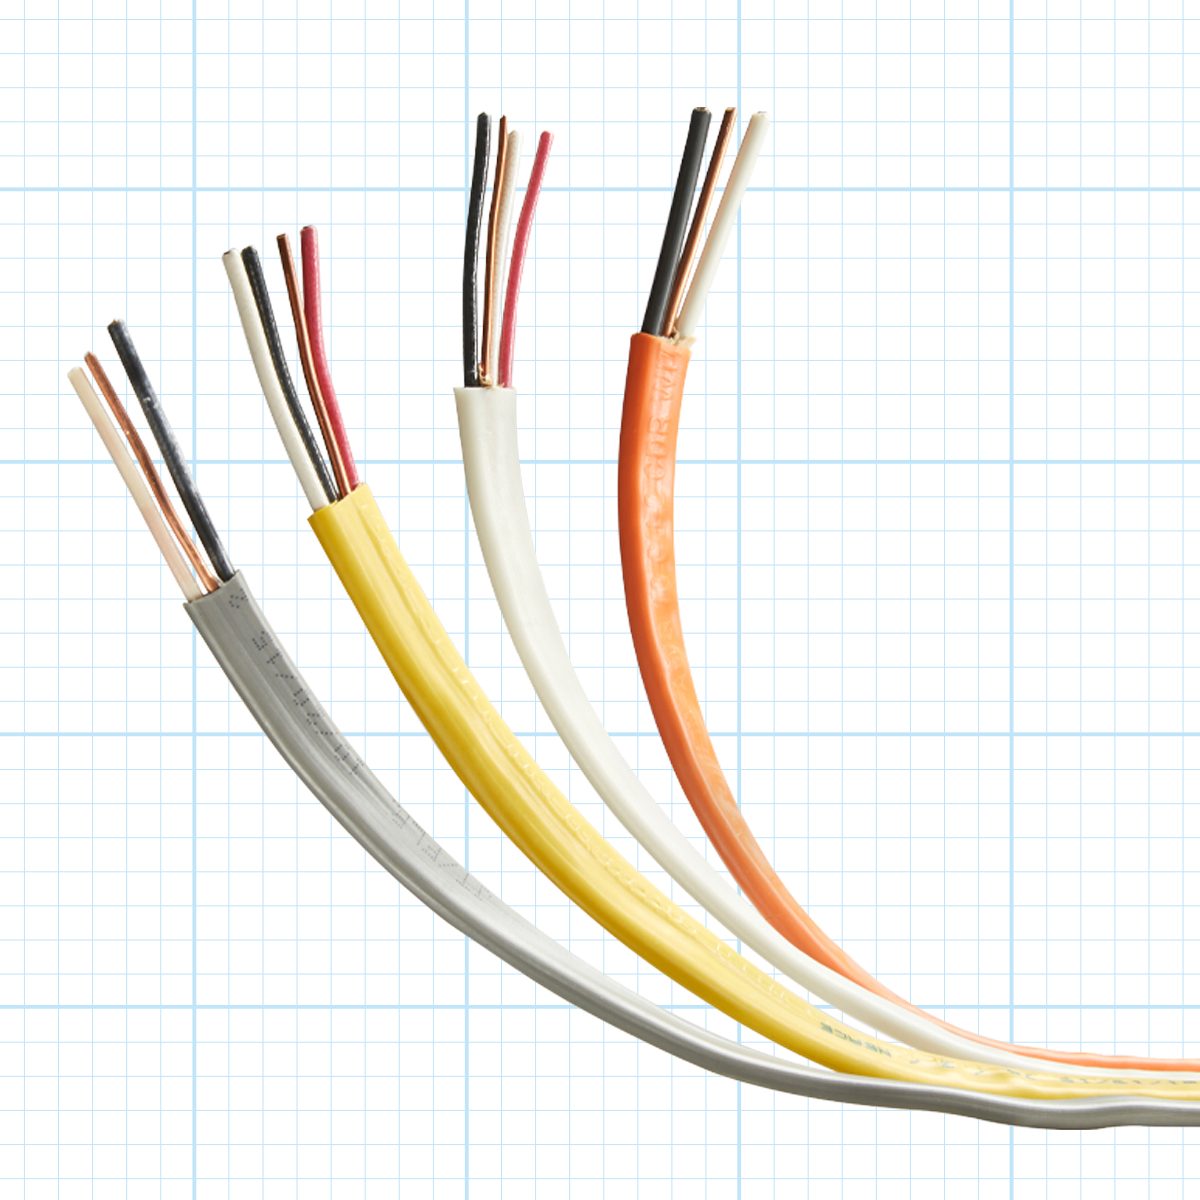 Attaching Wires to Devices - Fine Homebuilding